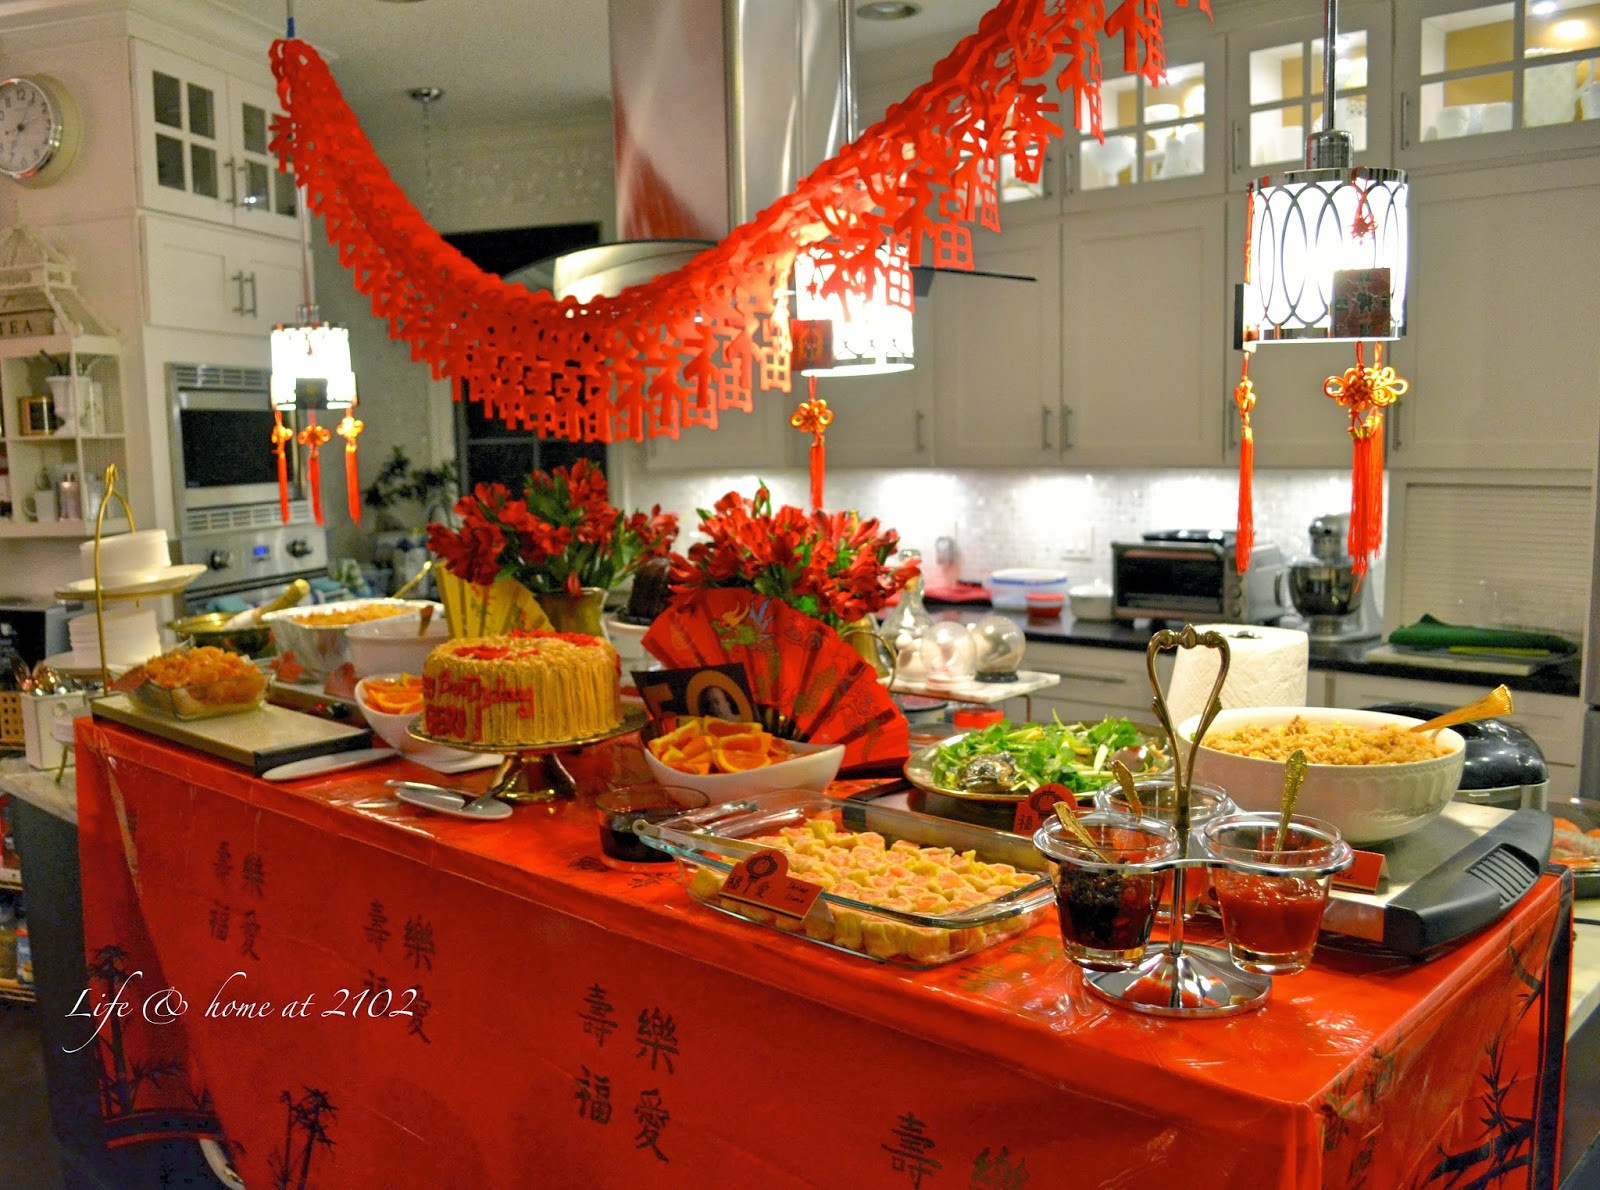 Food Ideas For Birthday Party At Home
 Life & Home at 2102 A Chinese Birthday Party